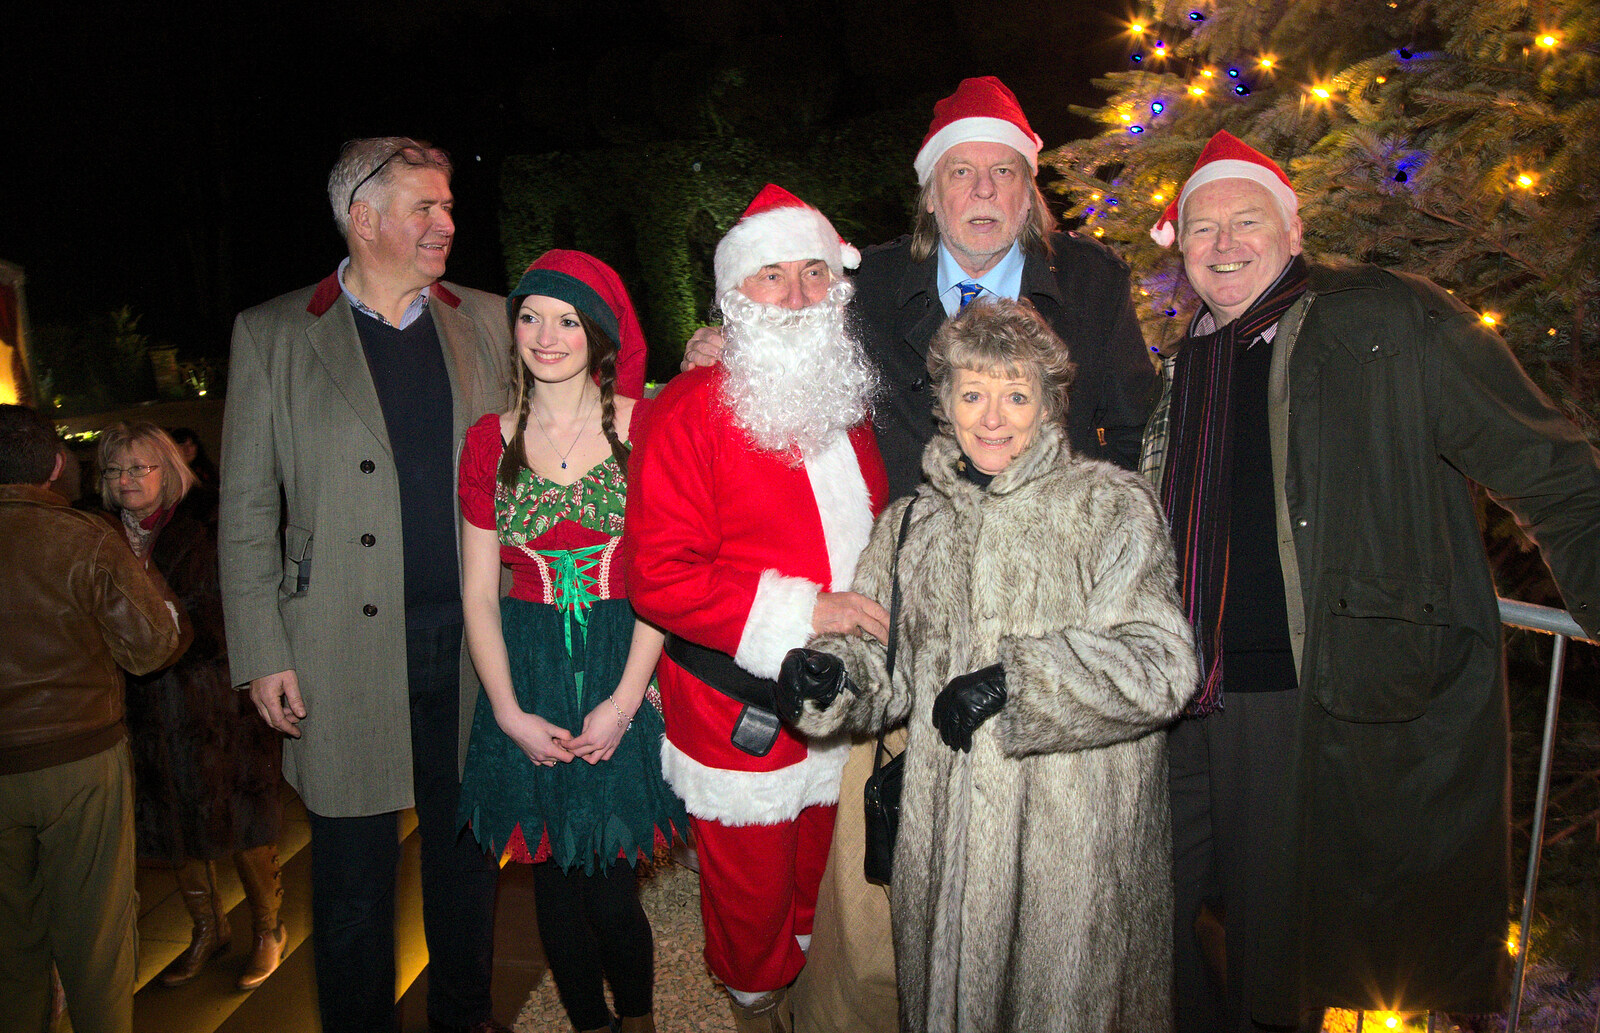 Another group photo from Rick Wakeman, Ian Lavender and the Christmas lights, The Oaksmere, Suffolk - 4th December 2014